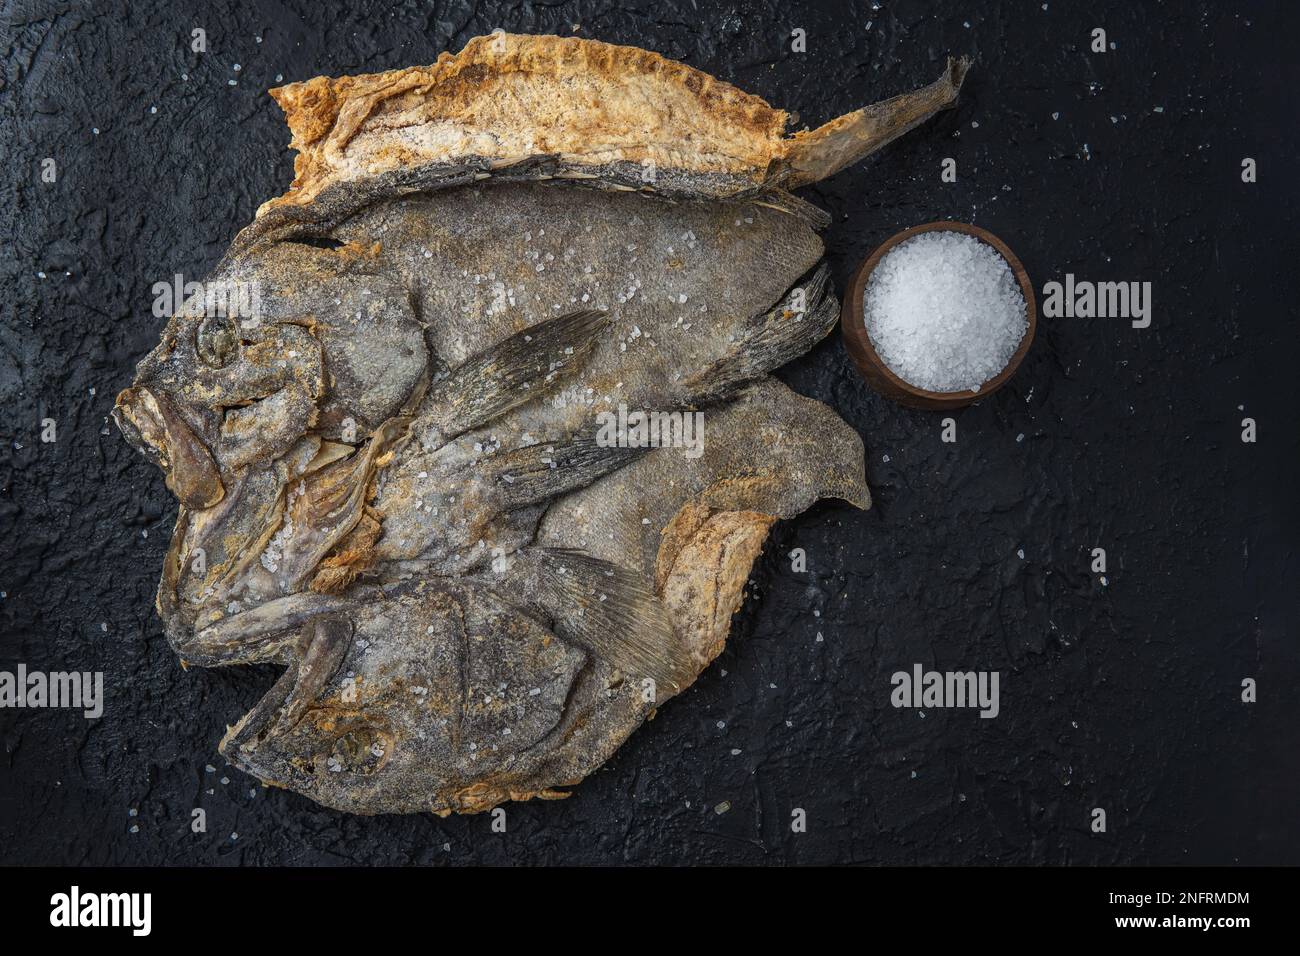 Top view of salted cod on a black stone background with grains of sea salt Stock Photo